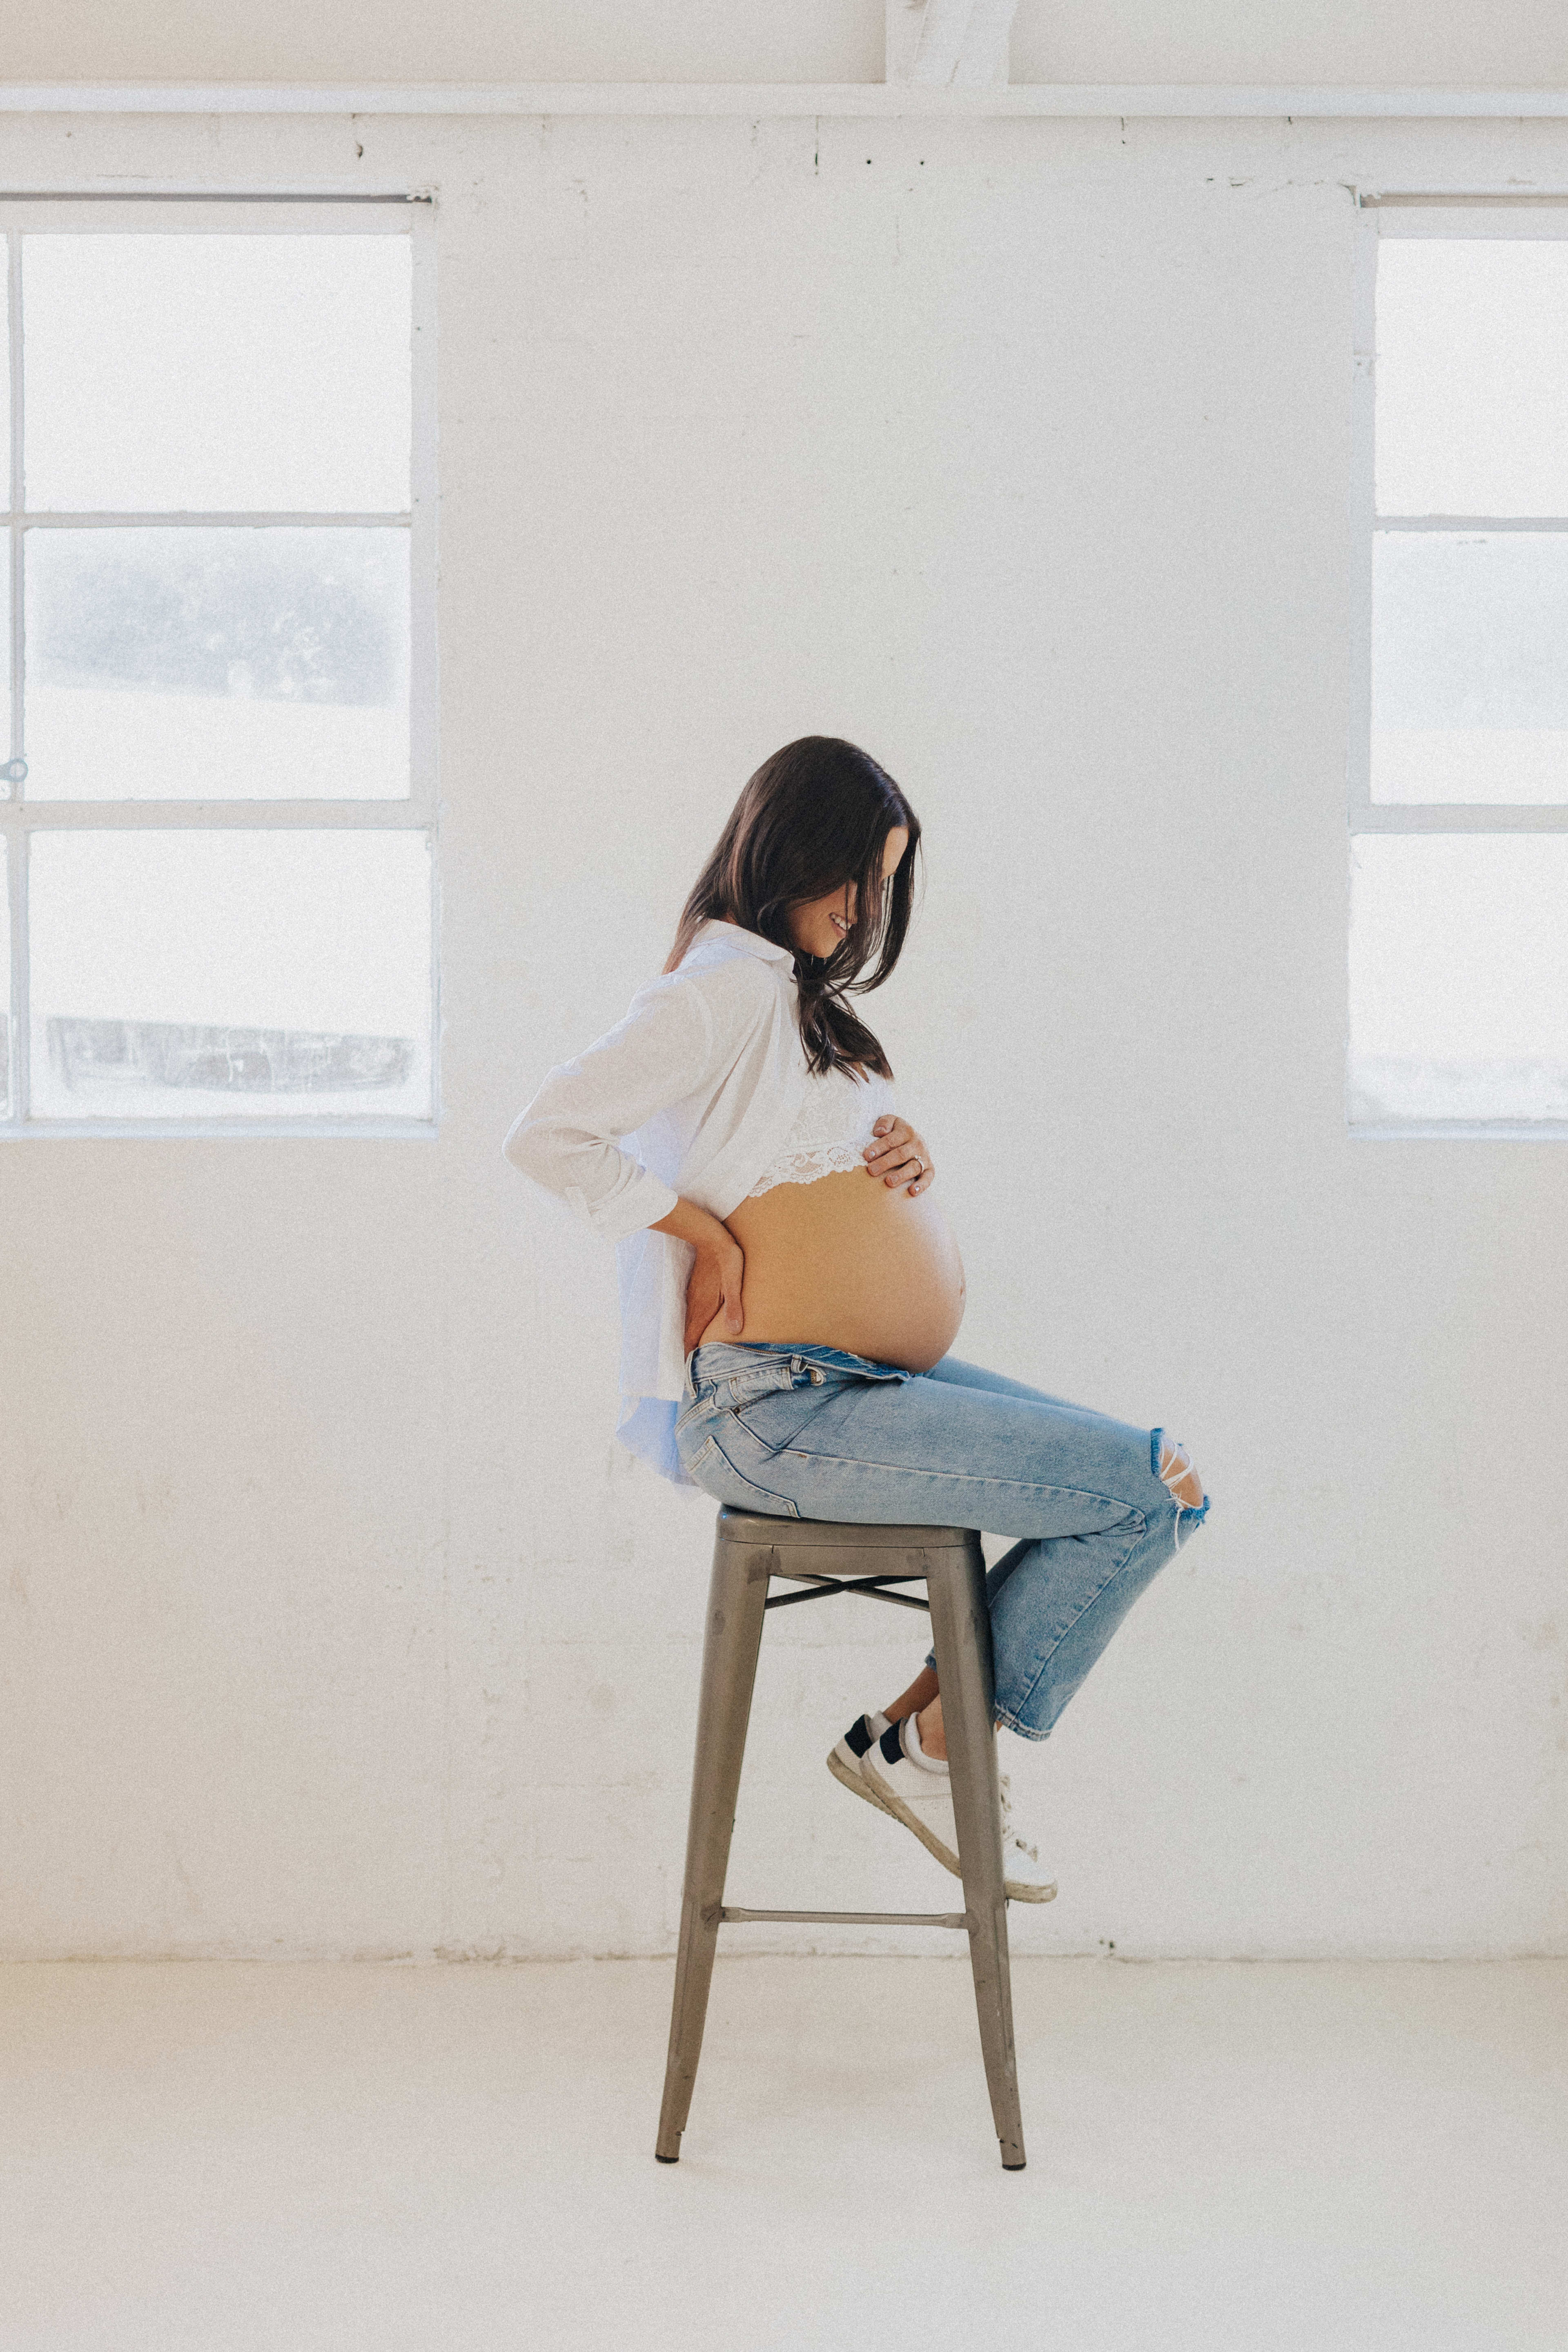 A photoshoot of a pregnant woman on a white stool with minimalistic surroundings.